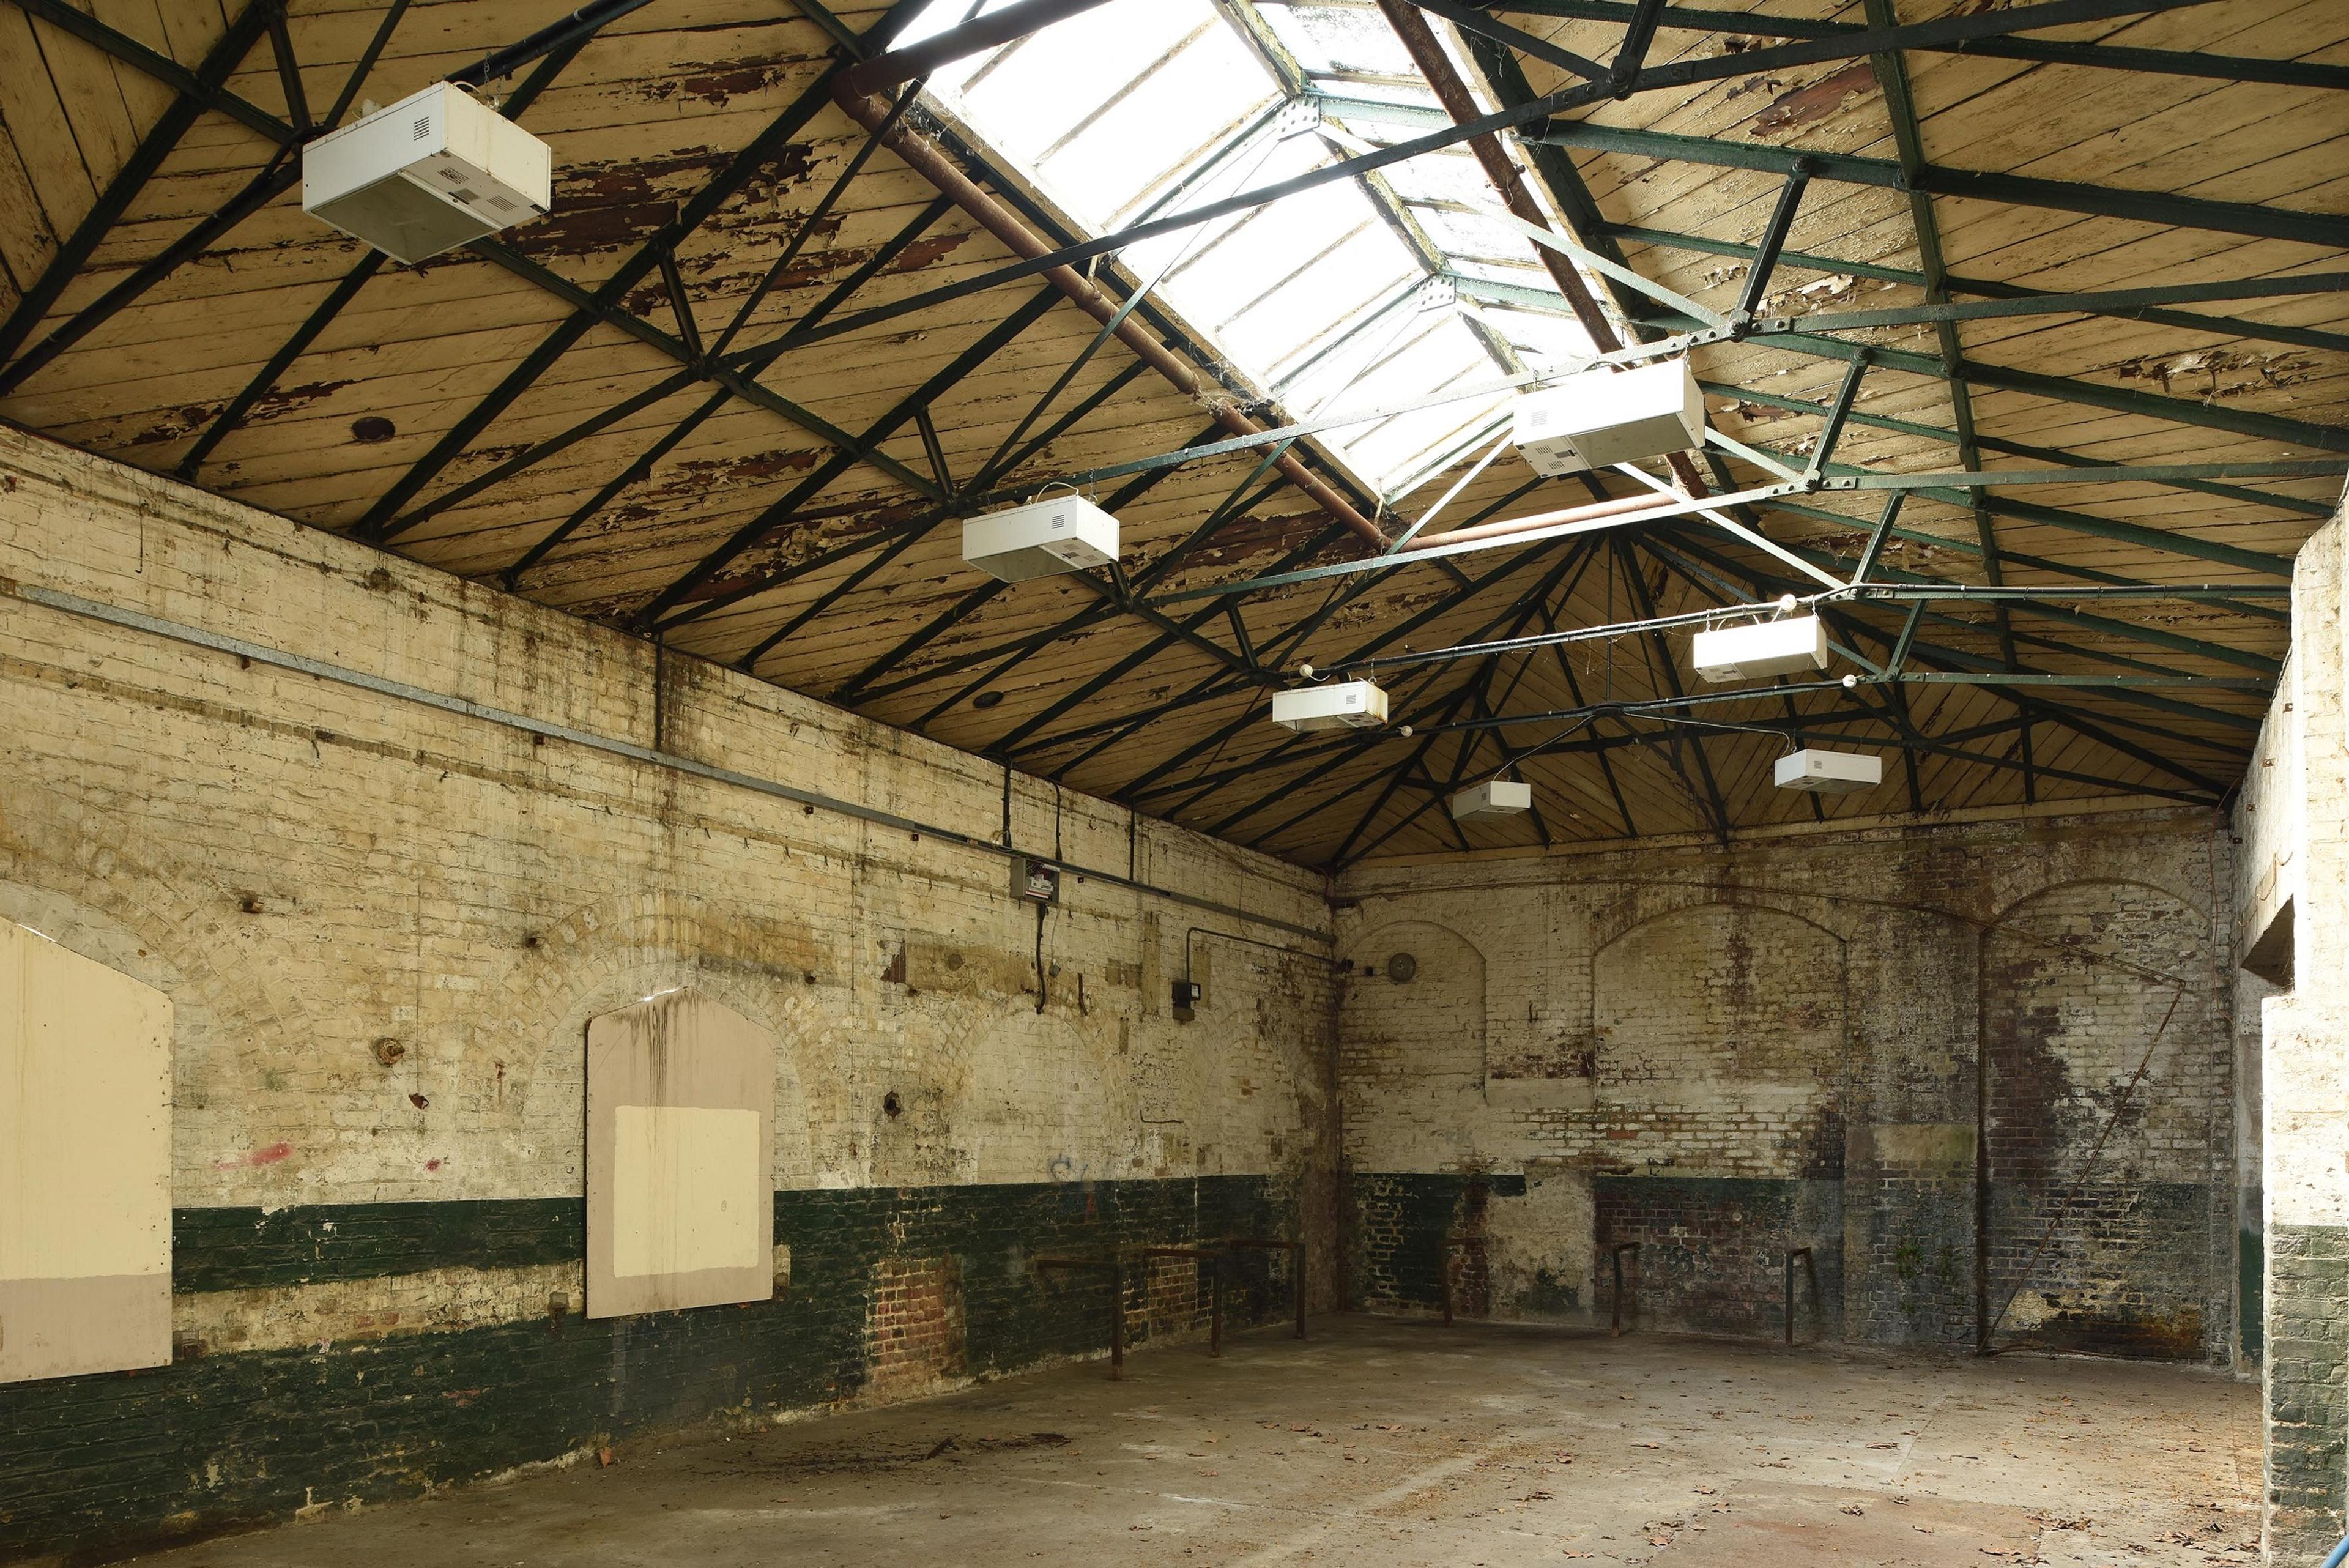 Interior of empty industrial brick building with exposed roof trusses and rooflight